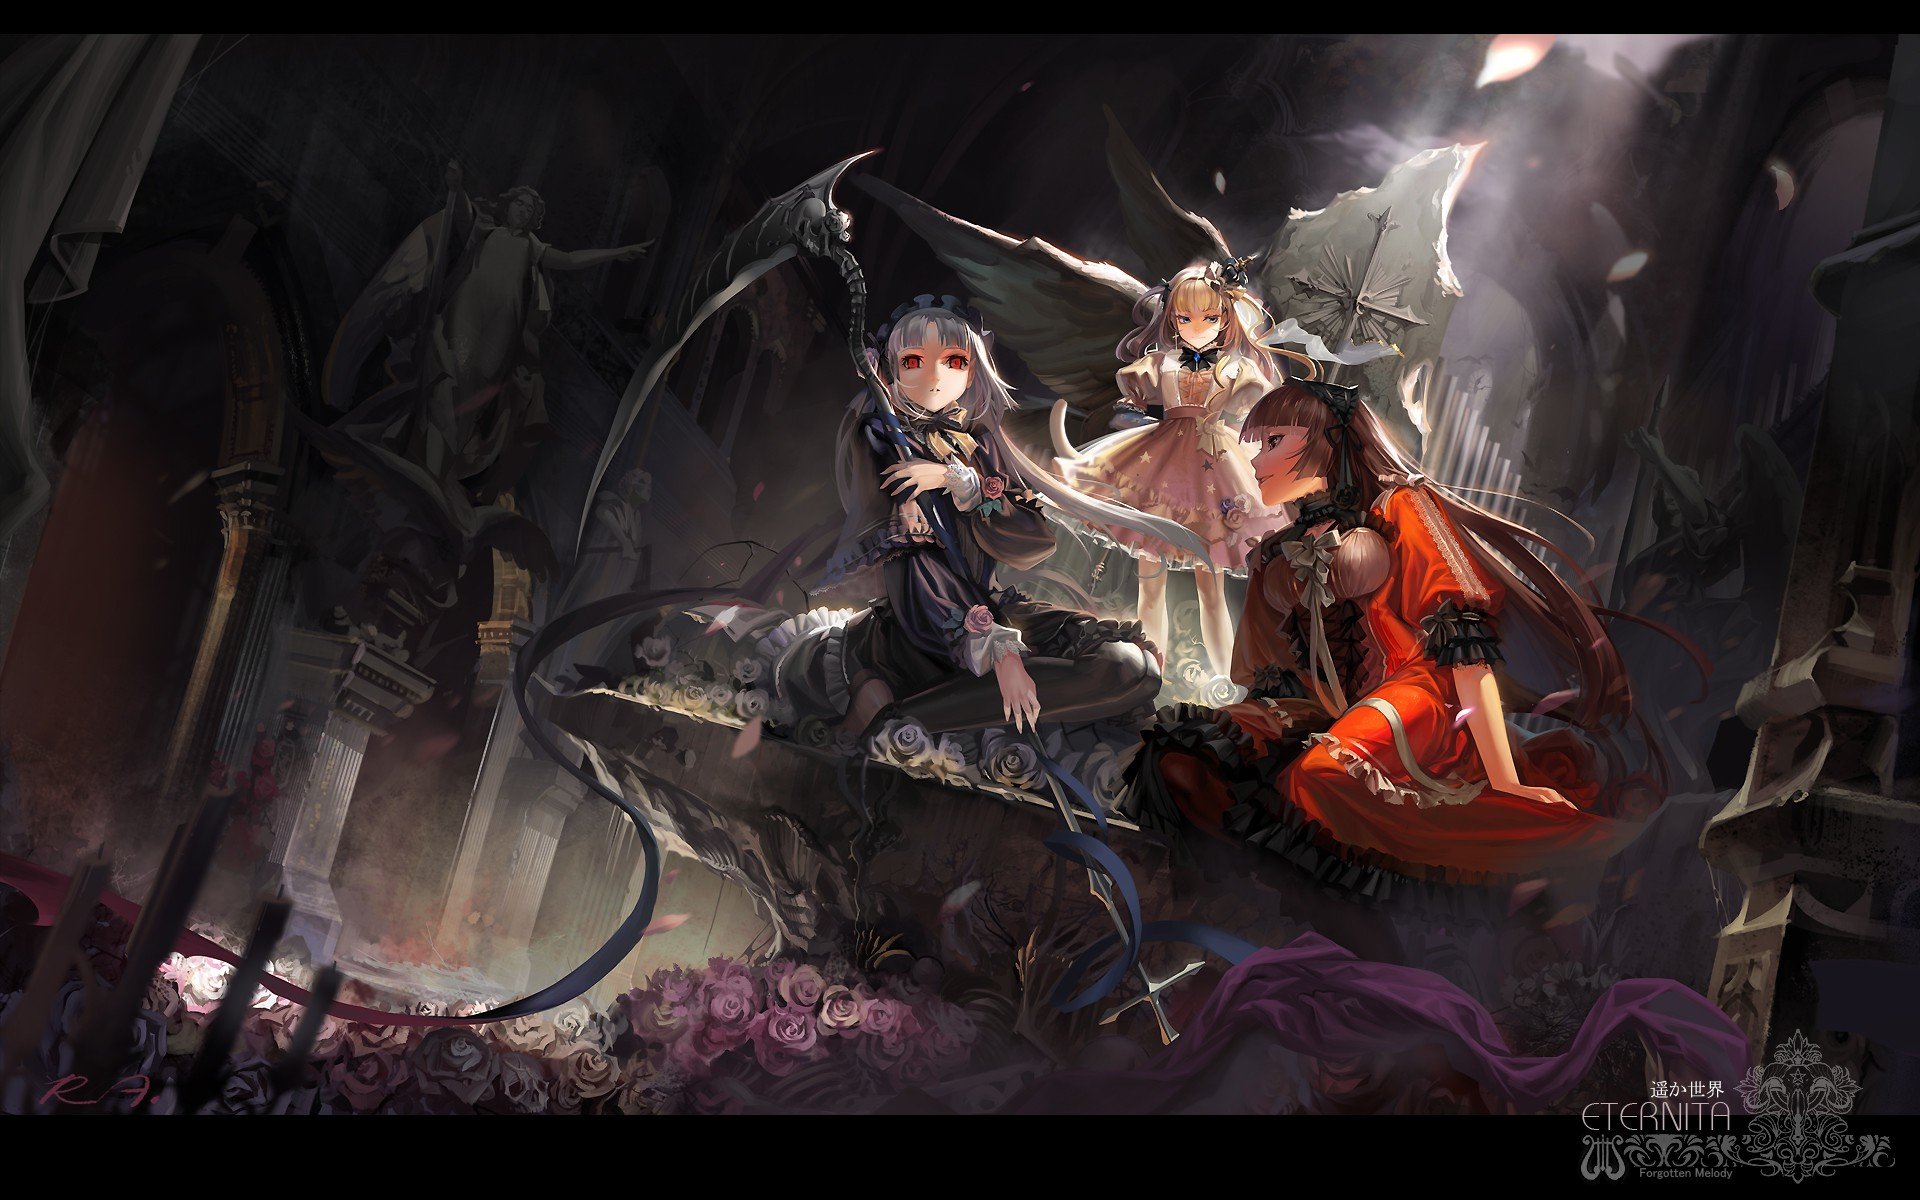 brunettes, Blondes, Tails, Wings, Cross, Ruins, Dress, Flowers, Blue, Eyes, Scythe, Long, Hair, Ribbons, Weapons, Brown, Eyes, Gothic, Fantasy, Art, Red, Eyes, Twintails, Bows, Red, Dress, Sitting, Black, Dress, Wallpaper